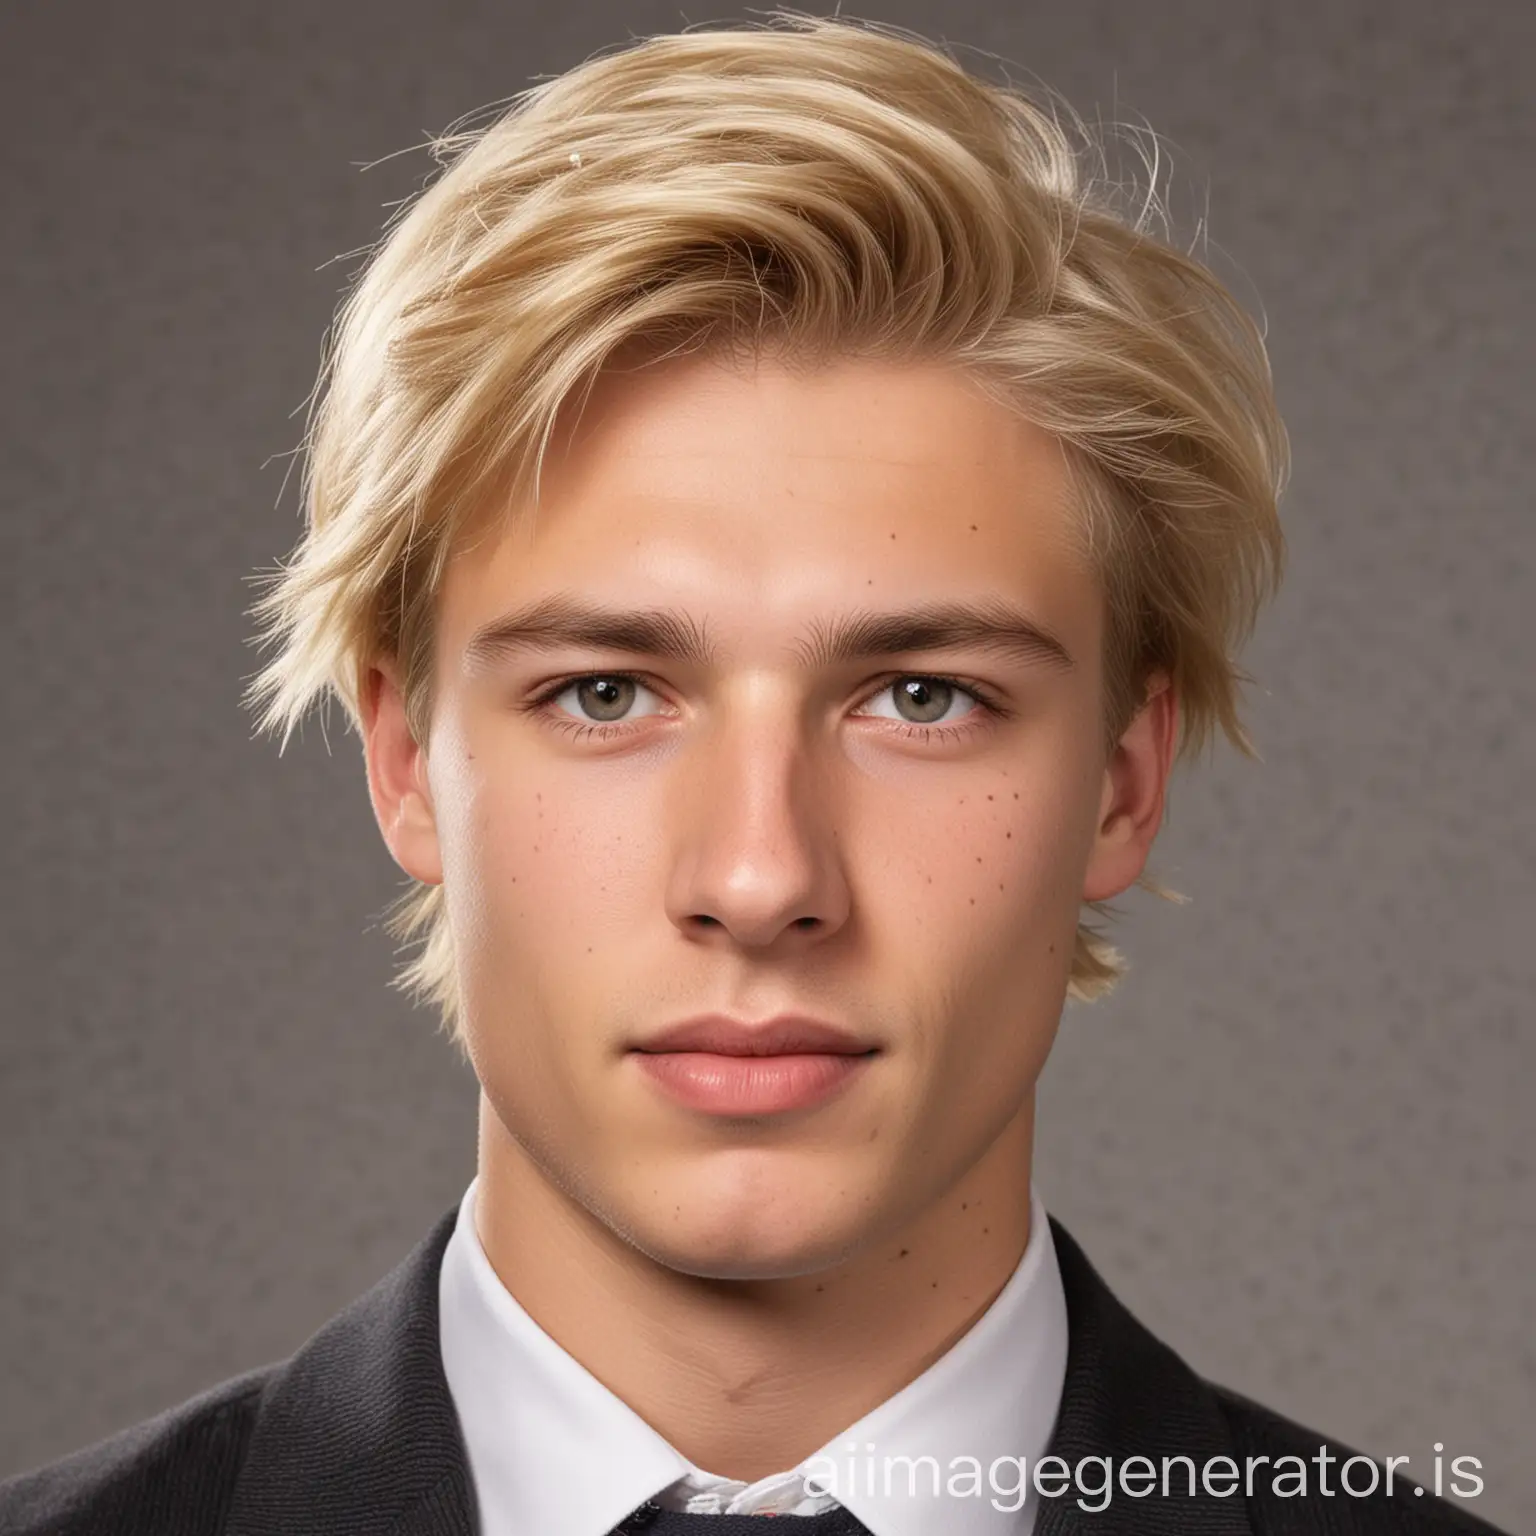 young, ambitious male mail student with blond hair from The Netherlands